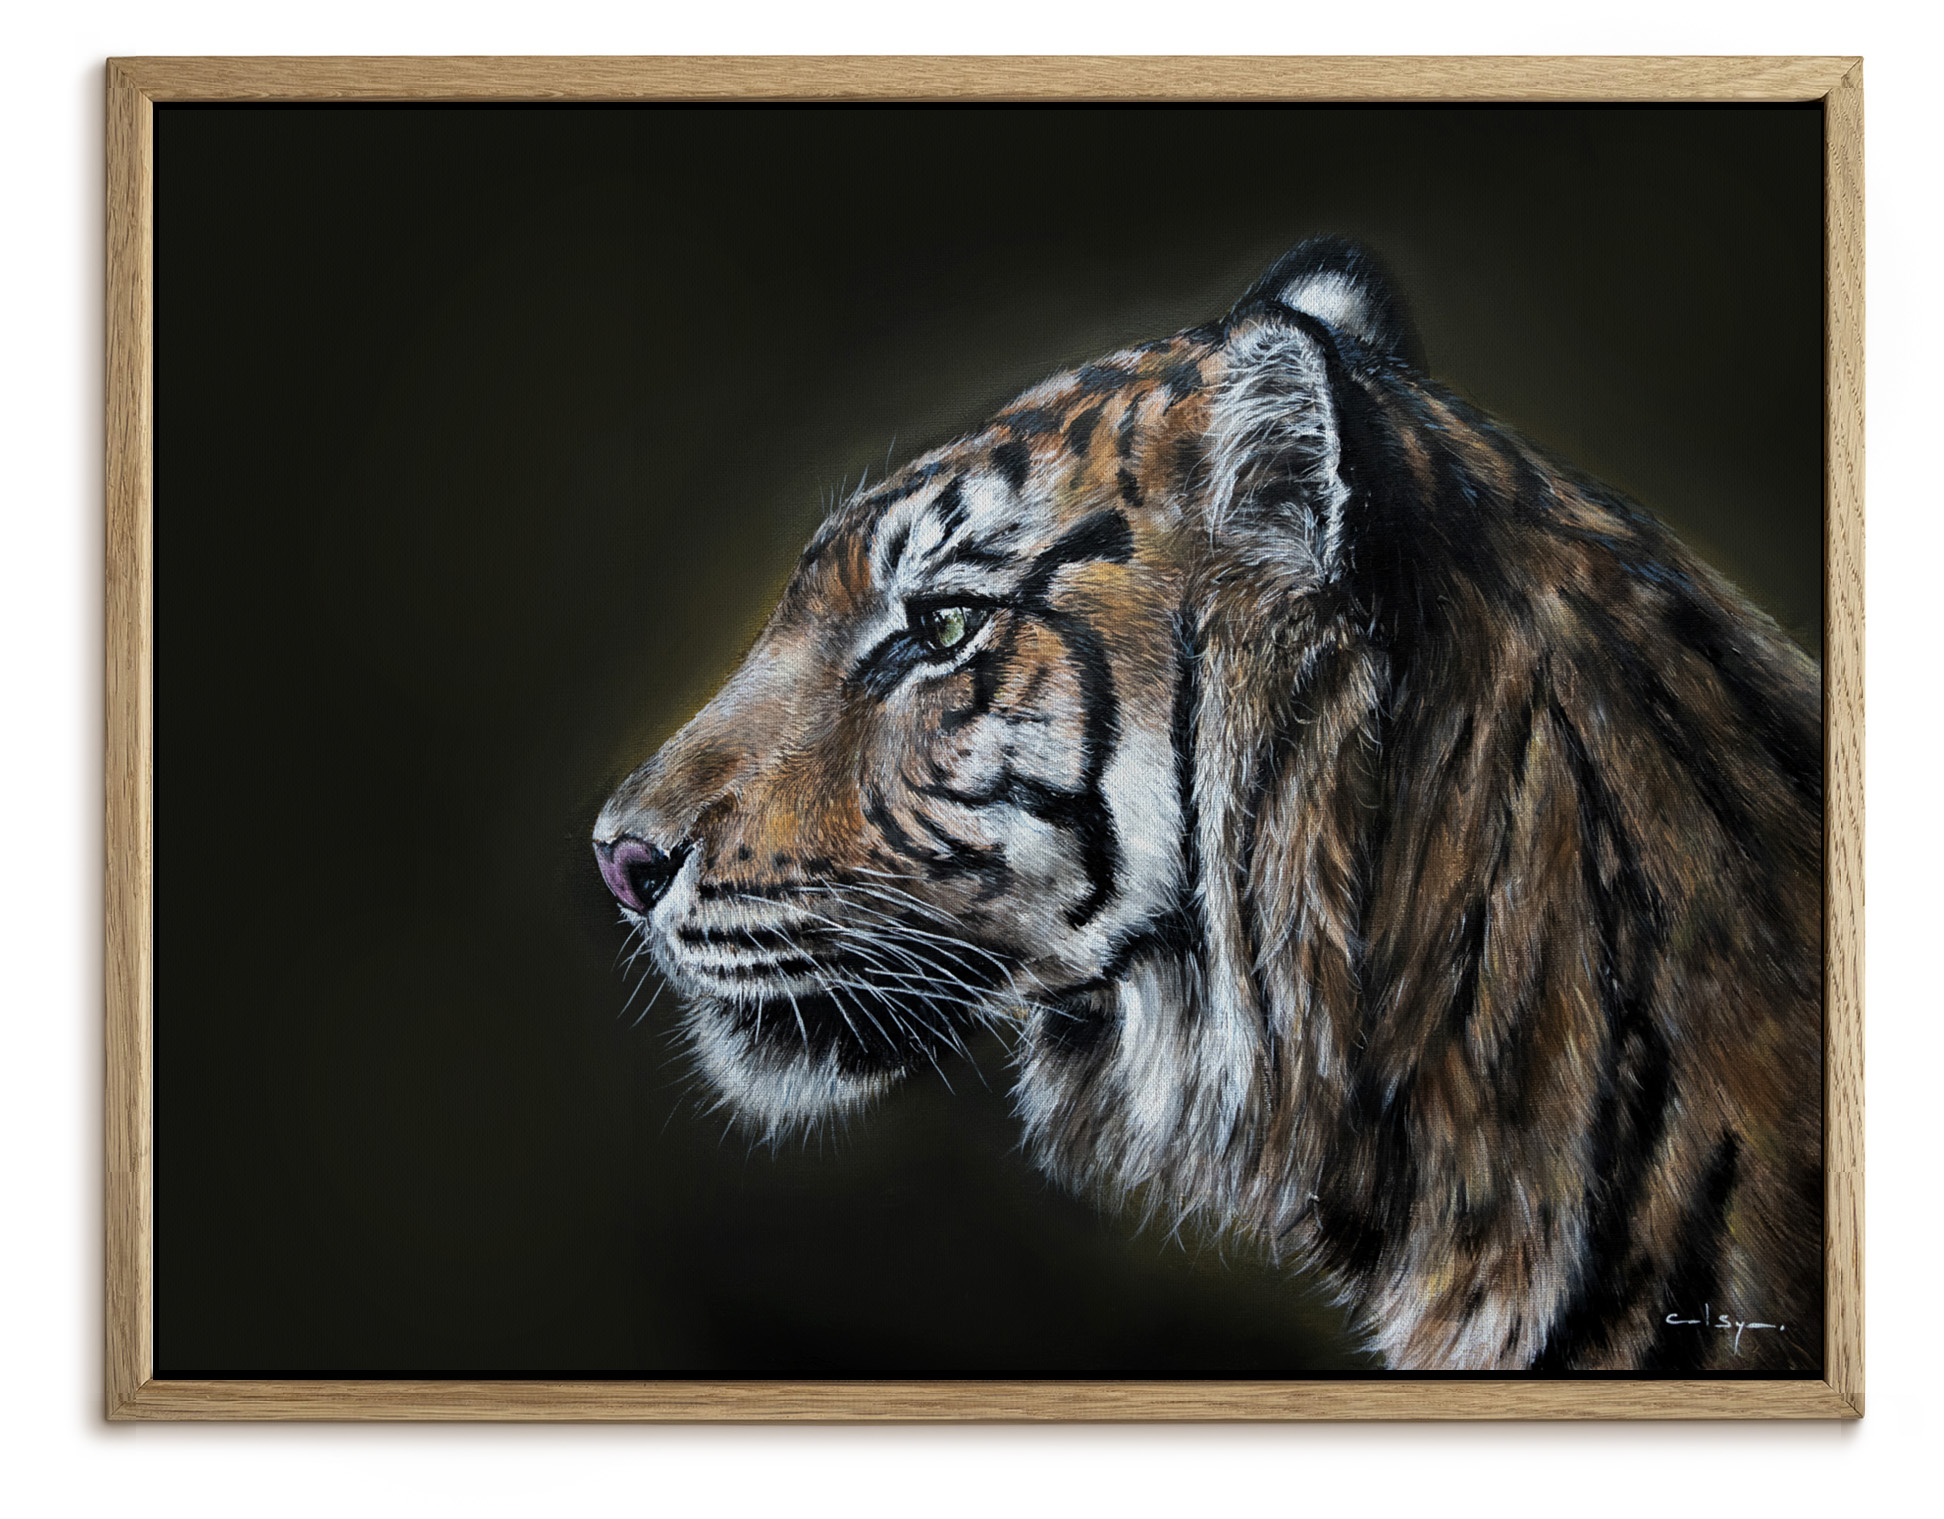 Tiger Acrylic Painting